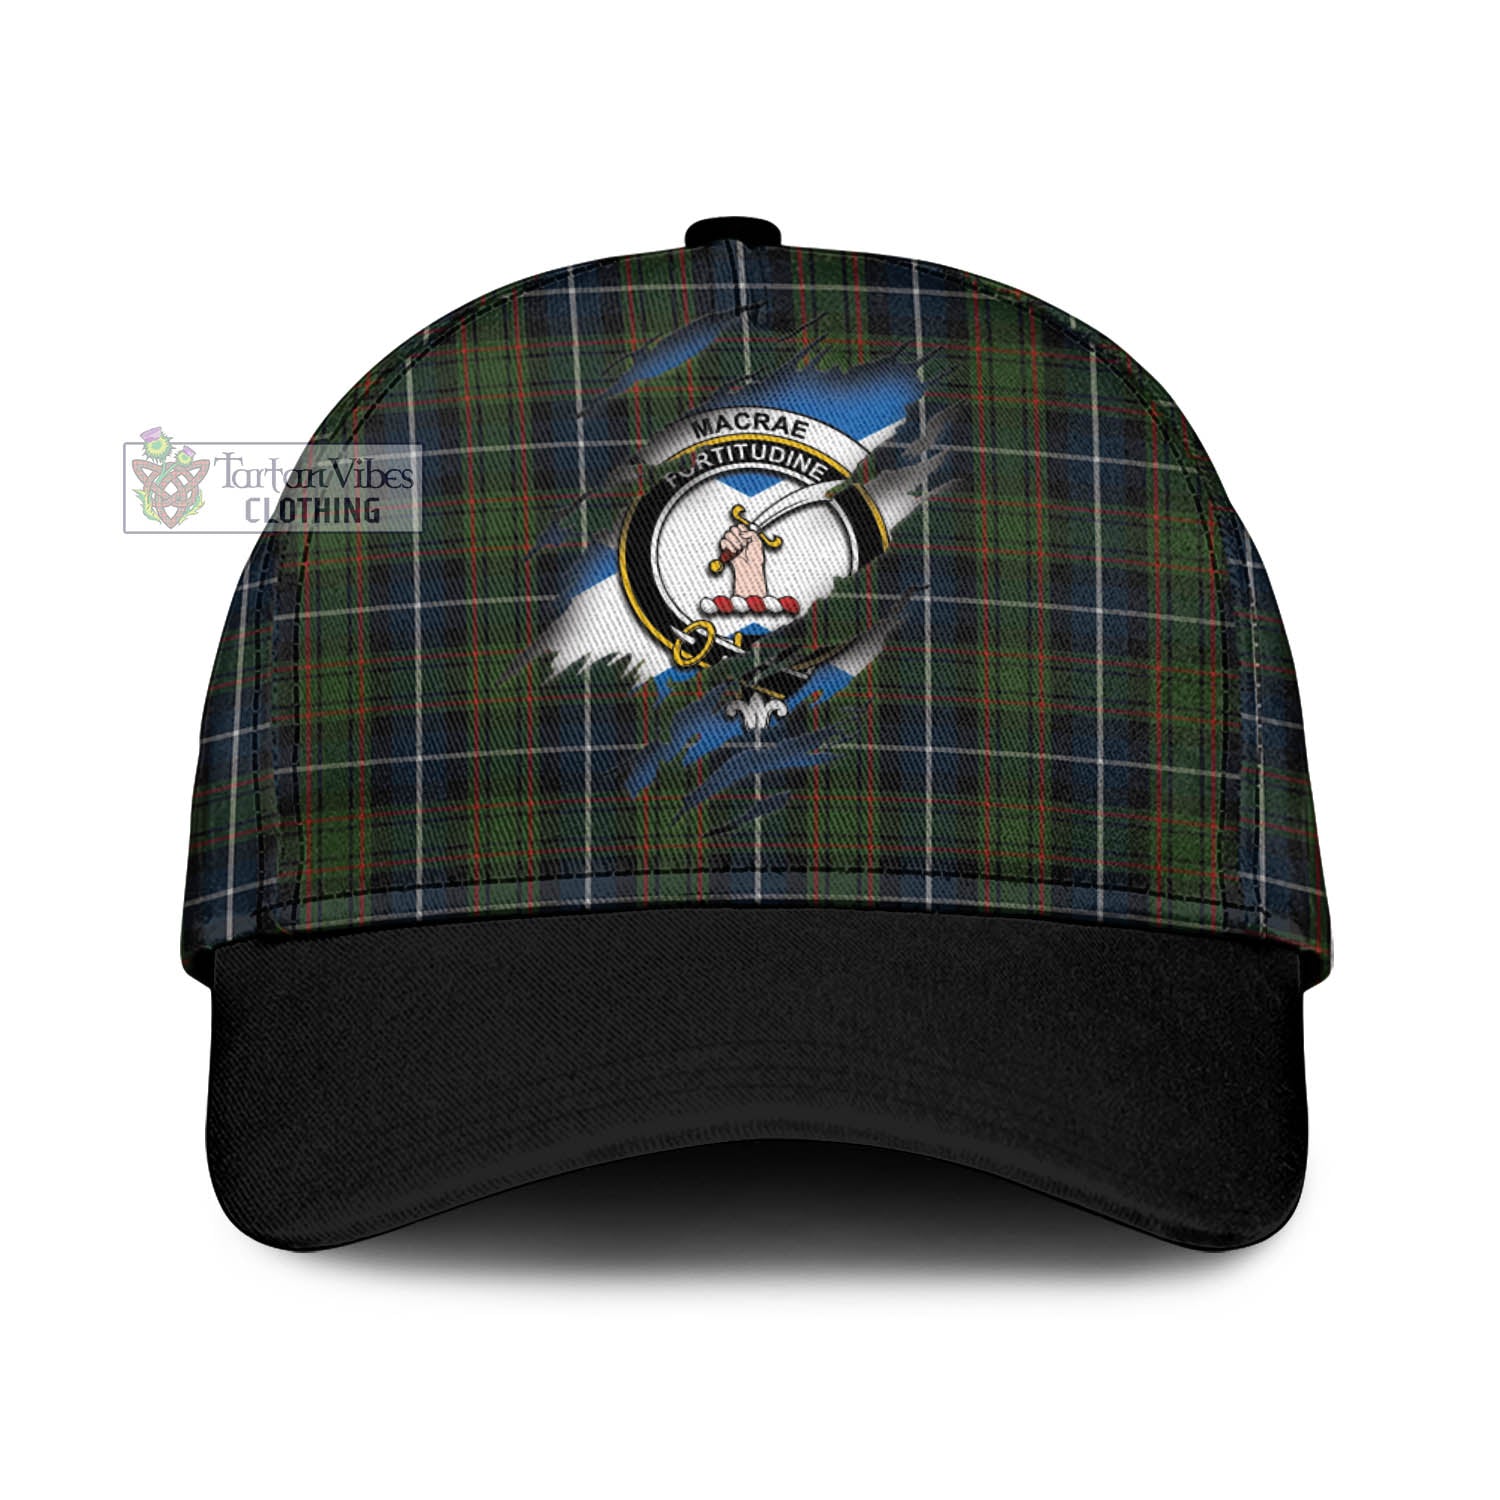 Tartan Vibes Clothing MacRae Hunting Tartan Classic Cap with Family Crest In Me Style